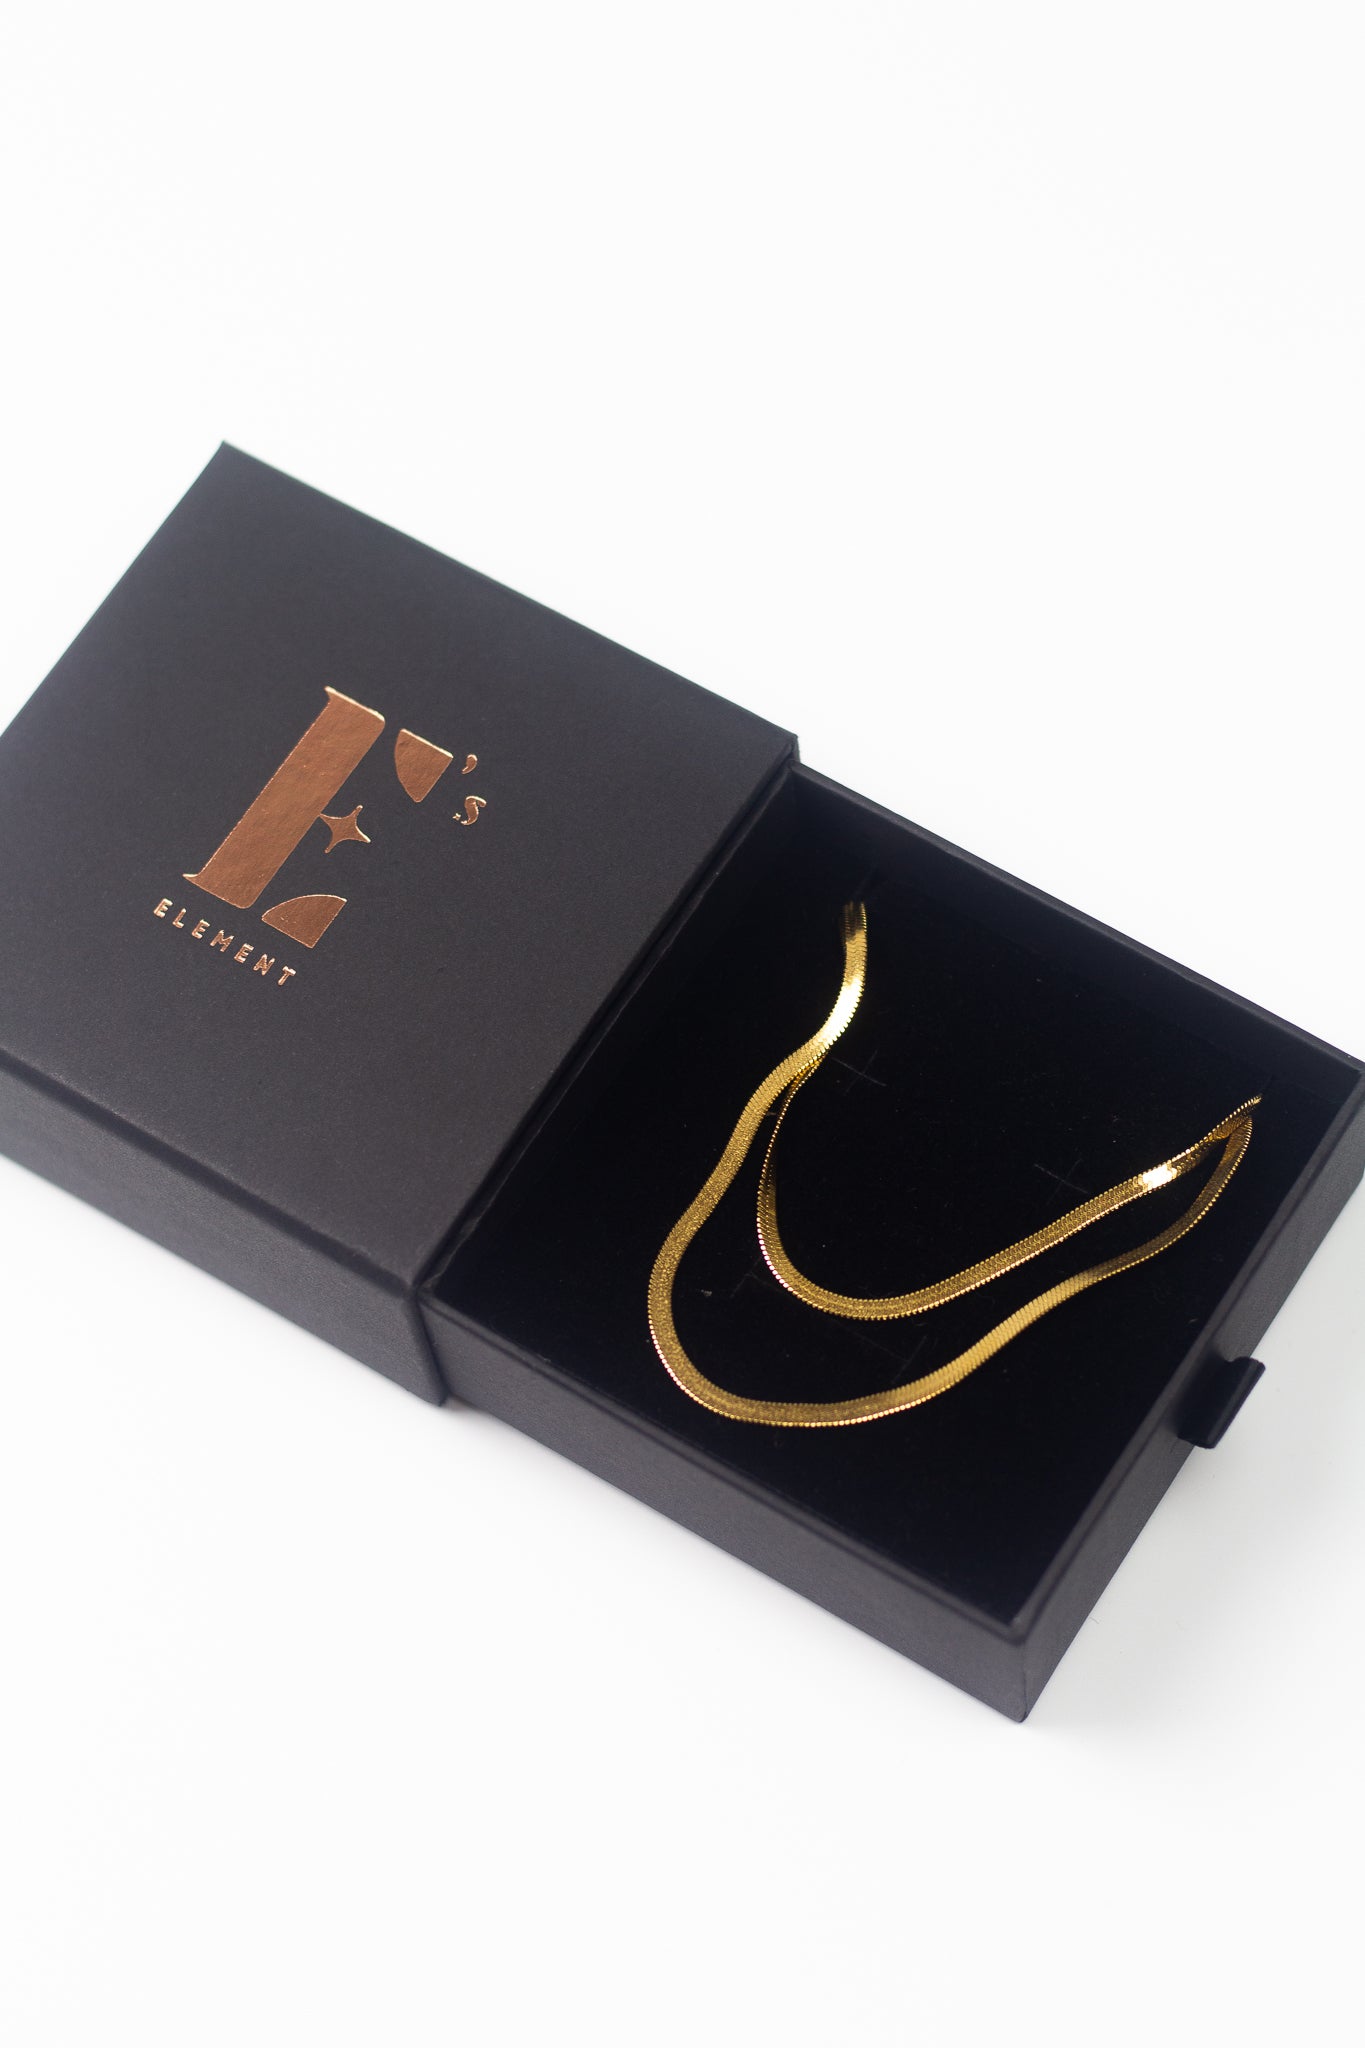 18K gold herringbone chain necklace resting in its container beside the cap of the container labelled with E's Element logo. Named "The Steph" Herringbone Chain Necklace by E's Element.